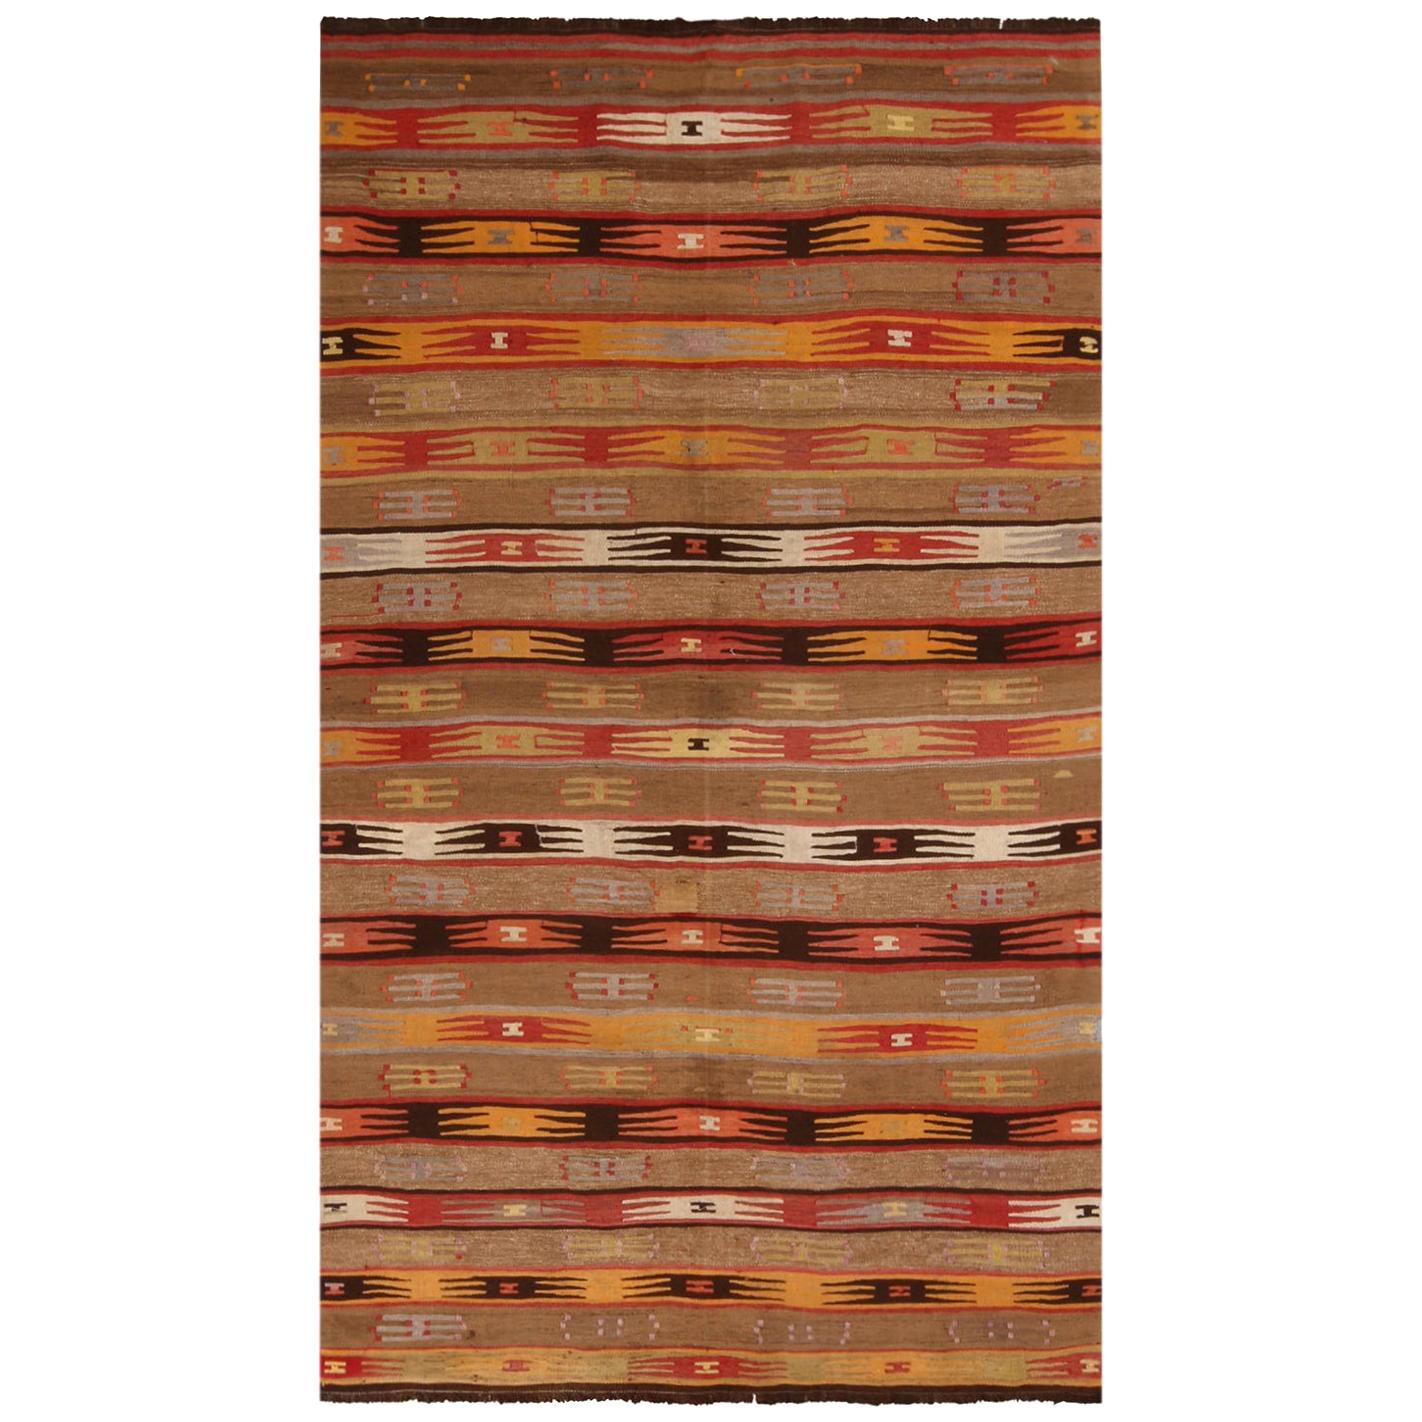 Vintage Geometric Beige-Brown and Yellow Wool Kilim Rug with Multi-Color Accents